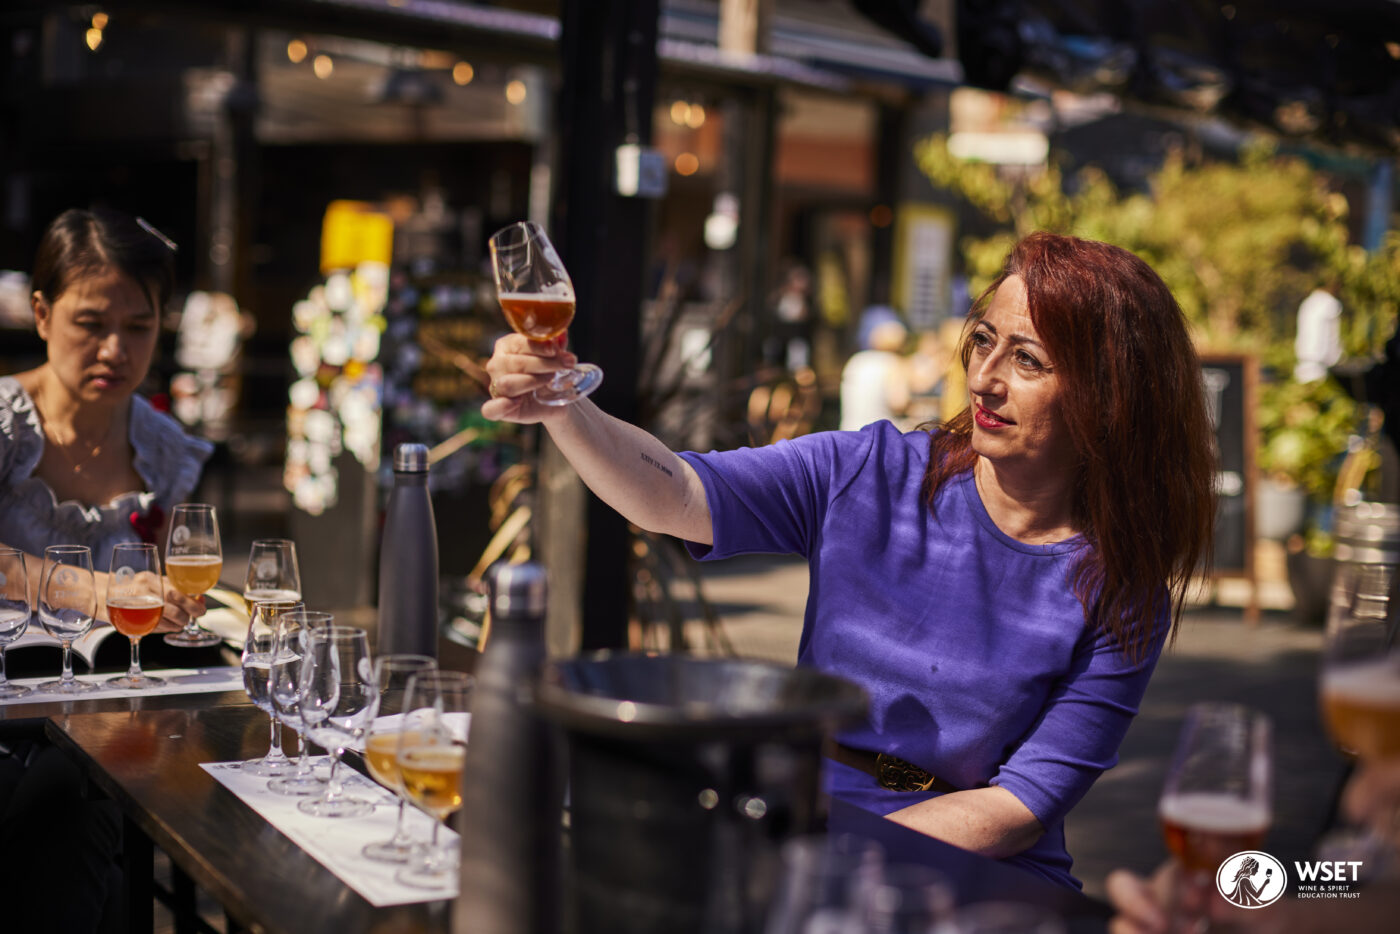 Redheaded woman in a purple shirt behind a bar holding up a beer in a glass.